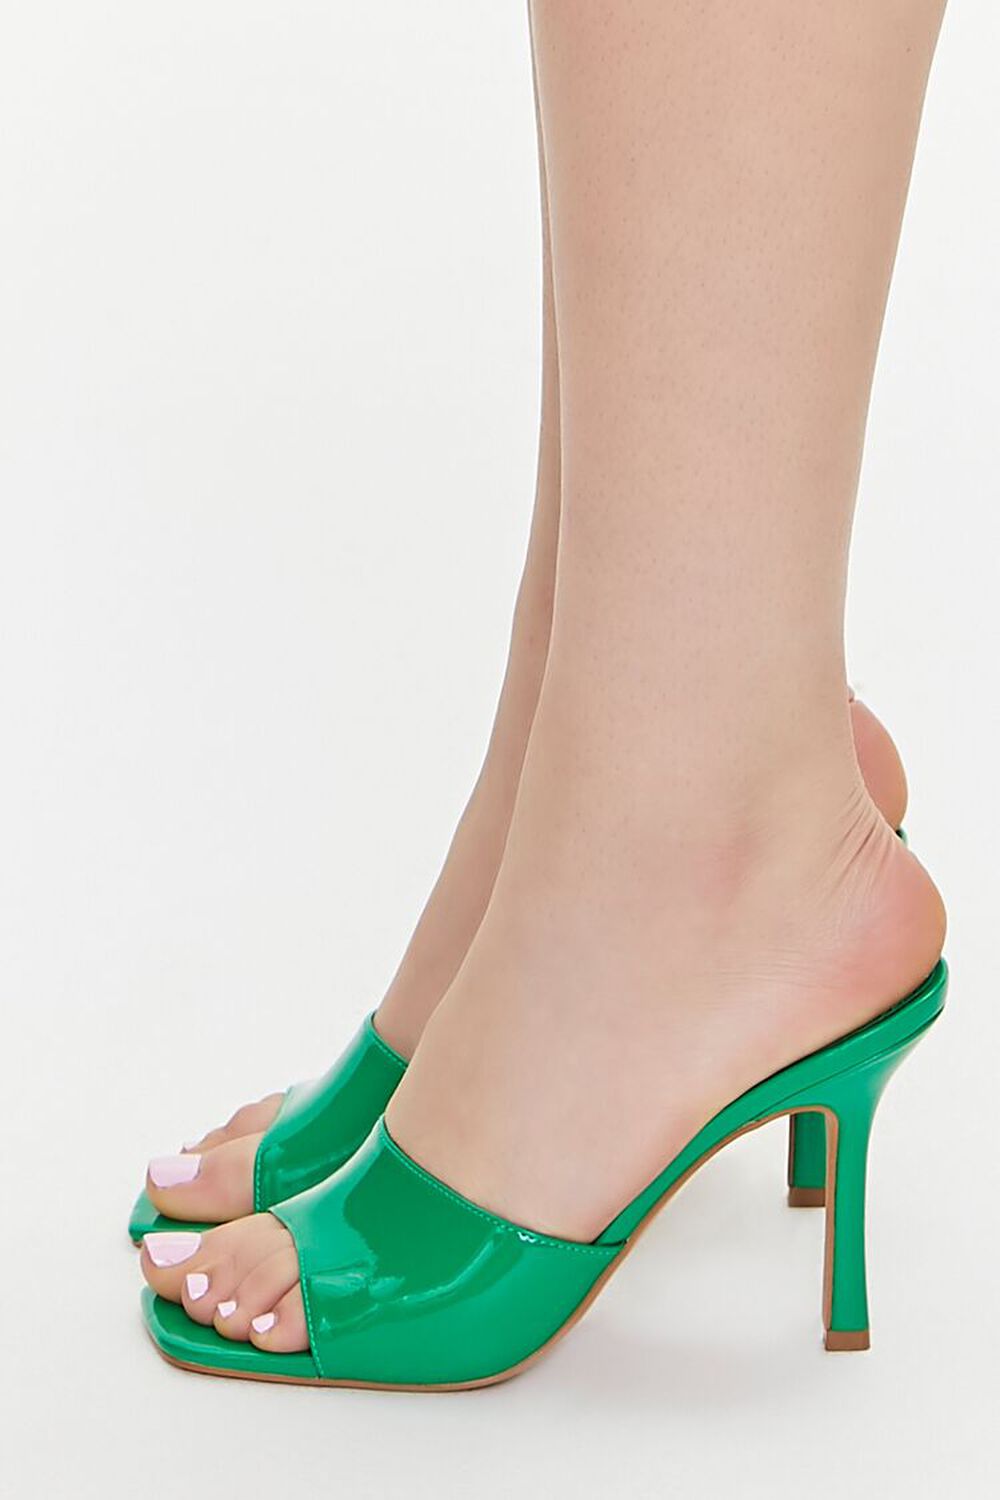 GREEN Faux Patent Leather Stiletto Heels, image 2